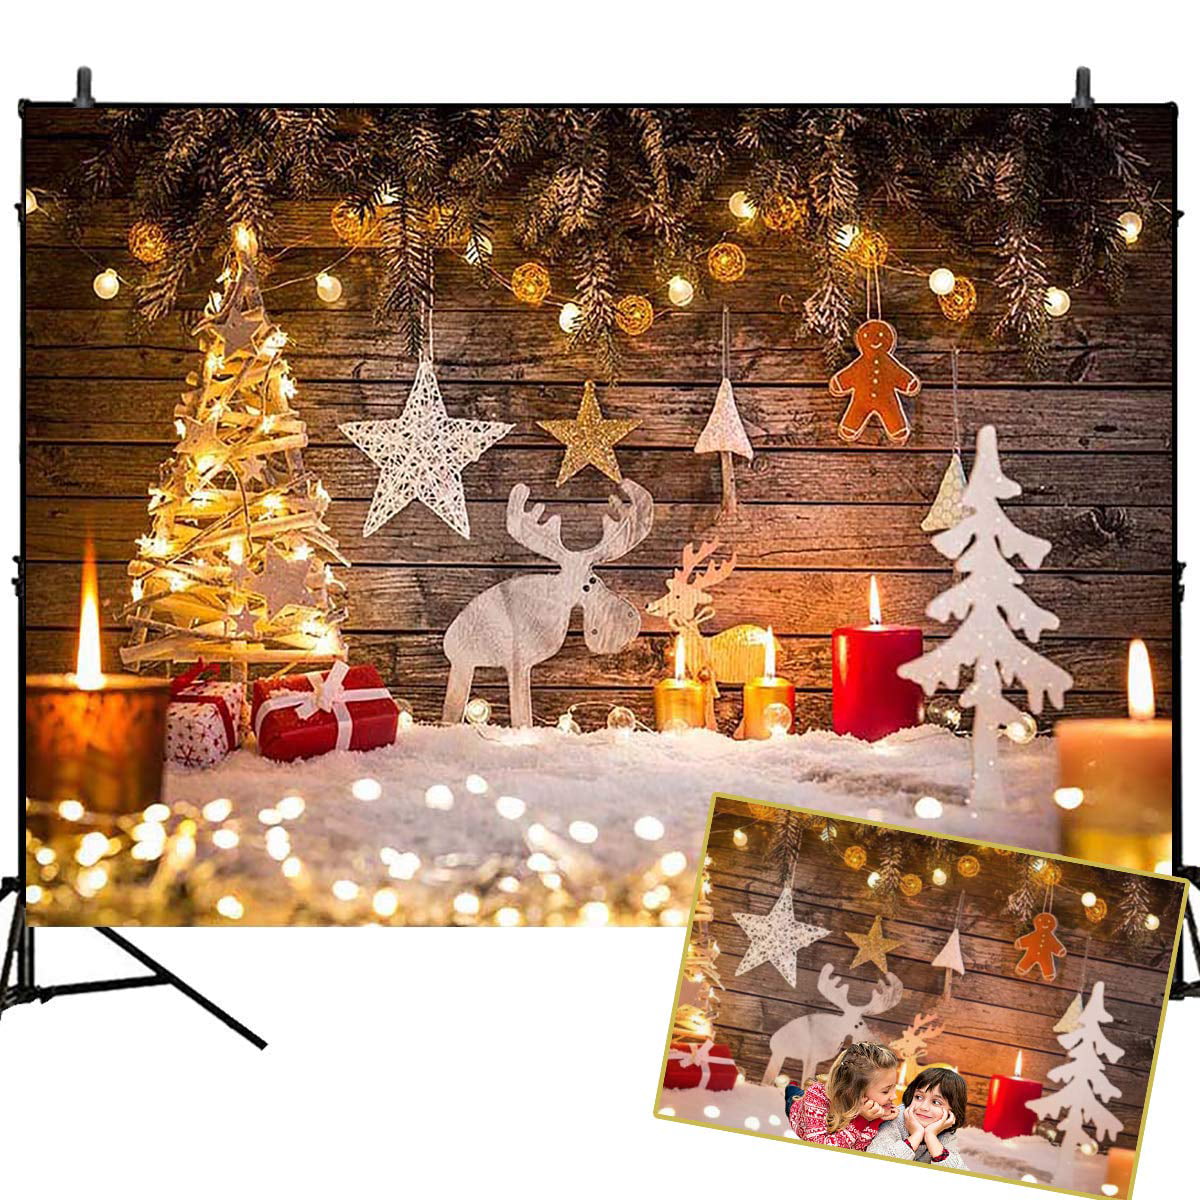 YongFoto 5x3ft Christmas Photography Backdrops Fireplace Candle Xmas Tree Lights Stars Wooden House Background Party Theme Banner Family Home Decor Poster Portrait Photo Shoot Studio 